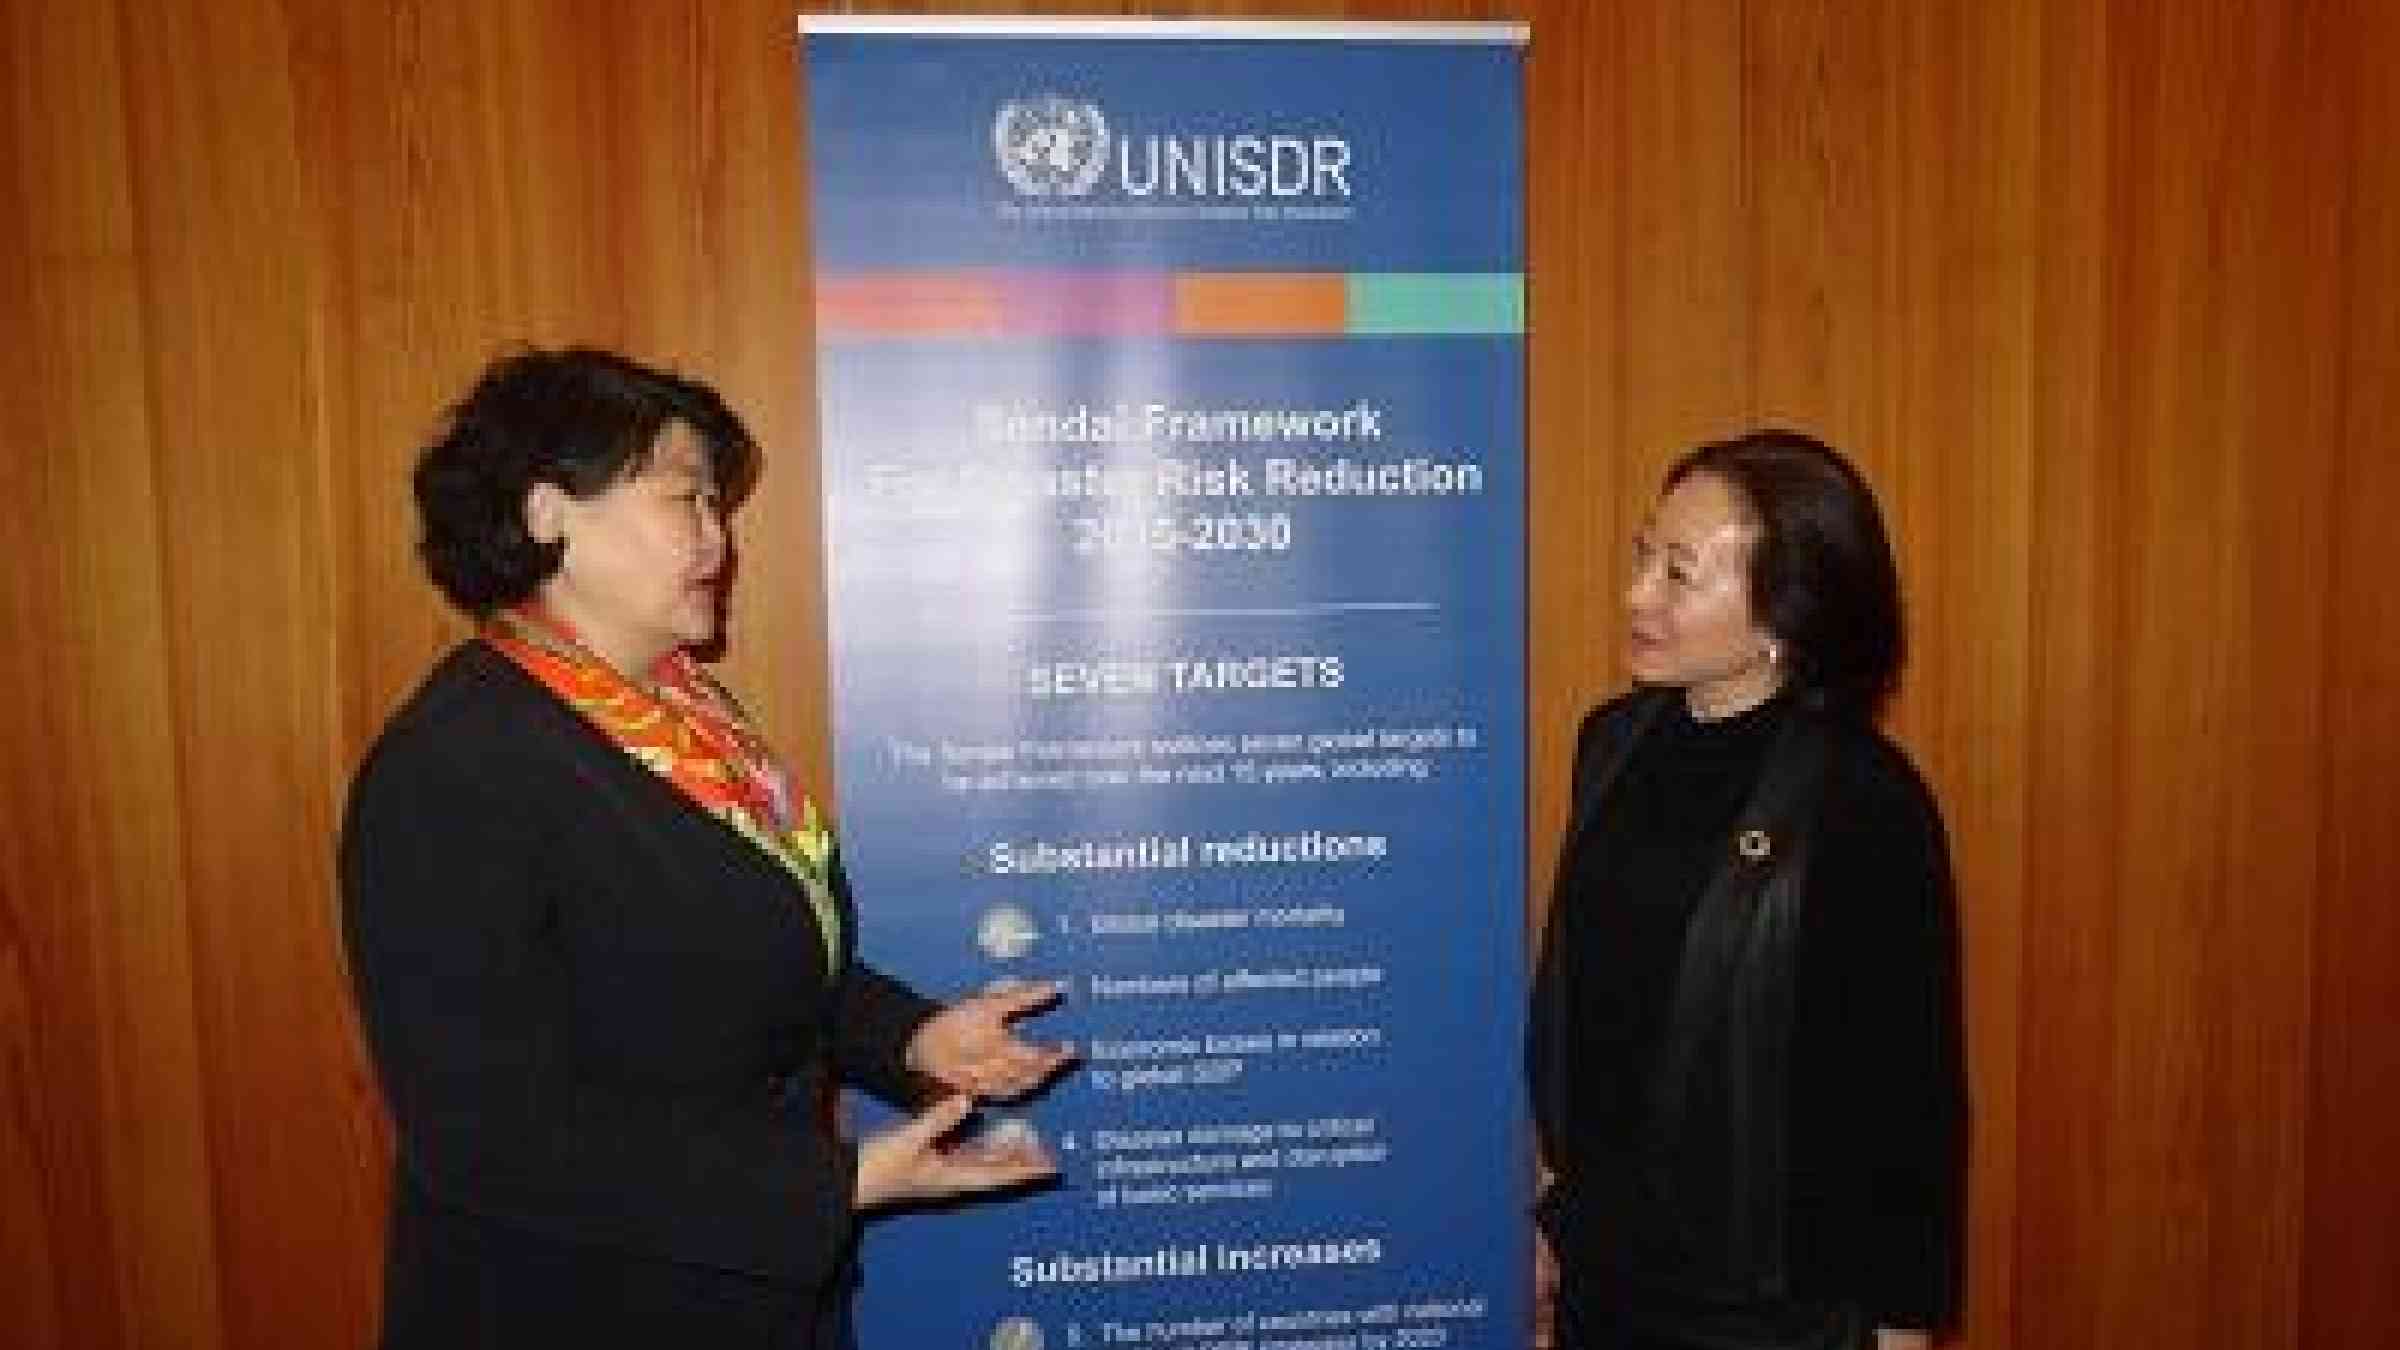 (From left): Syanaa Lkhagvasuren, Government of Mongolia, discussing the Asian Ministerial Conference on DRR with the head of UNISDR, Mami Mizutori